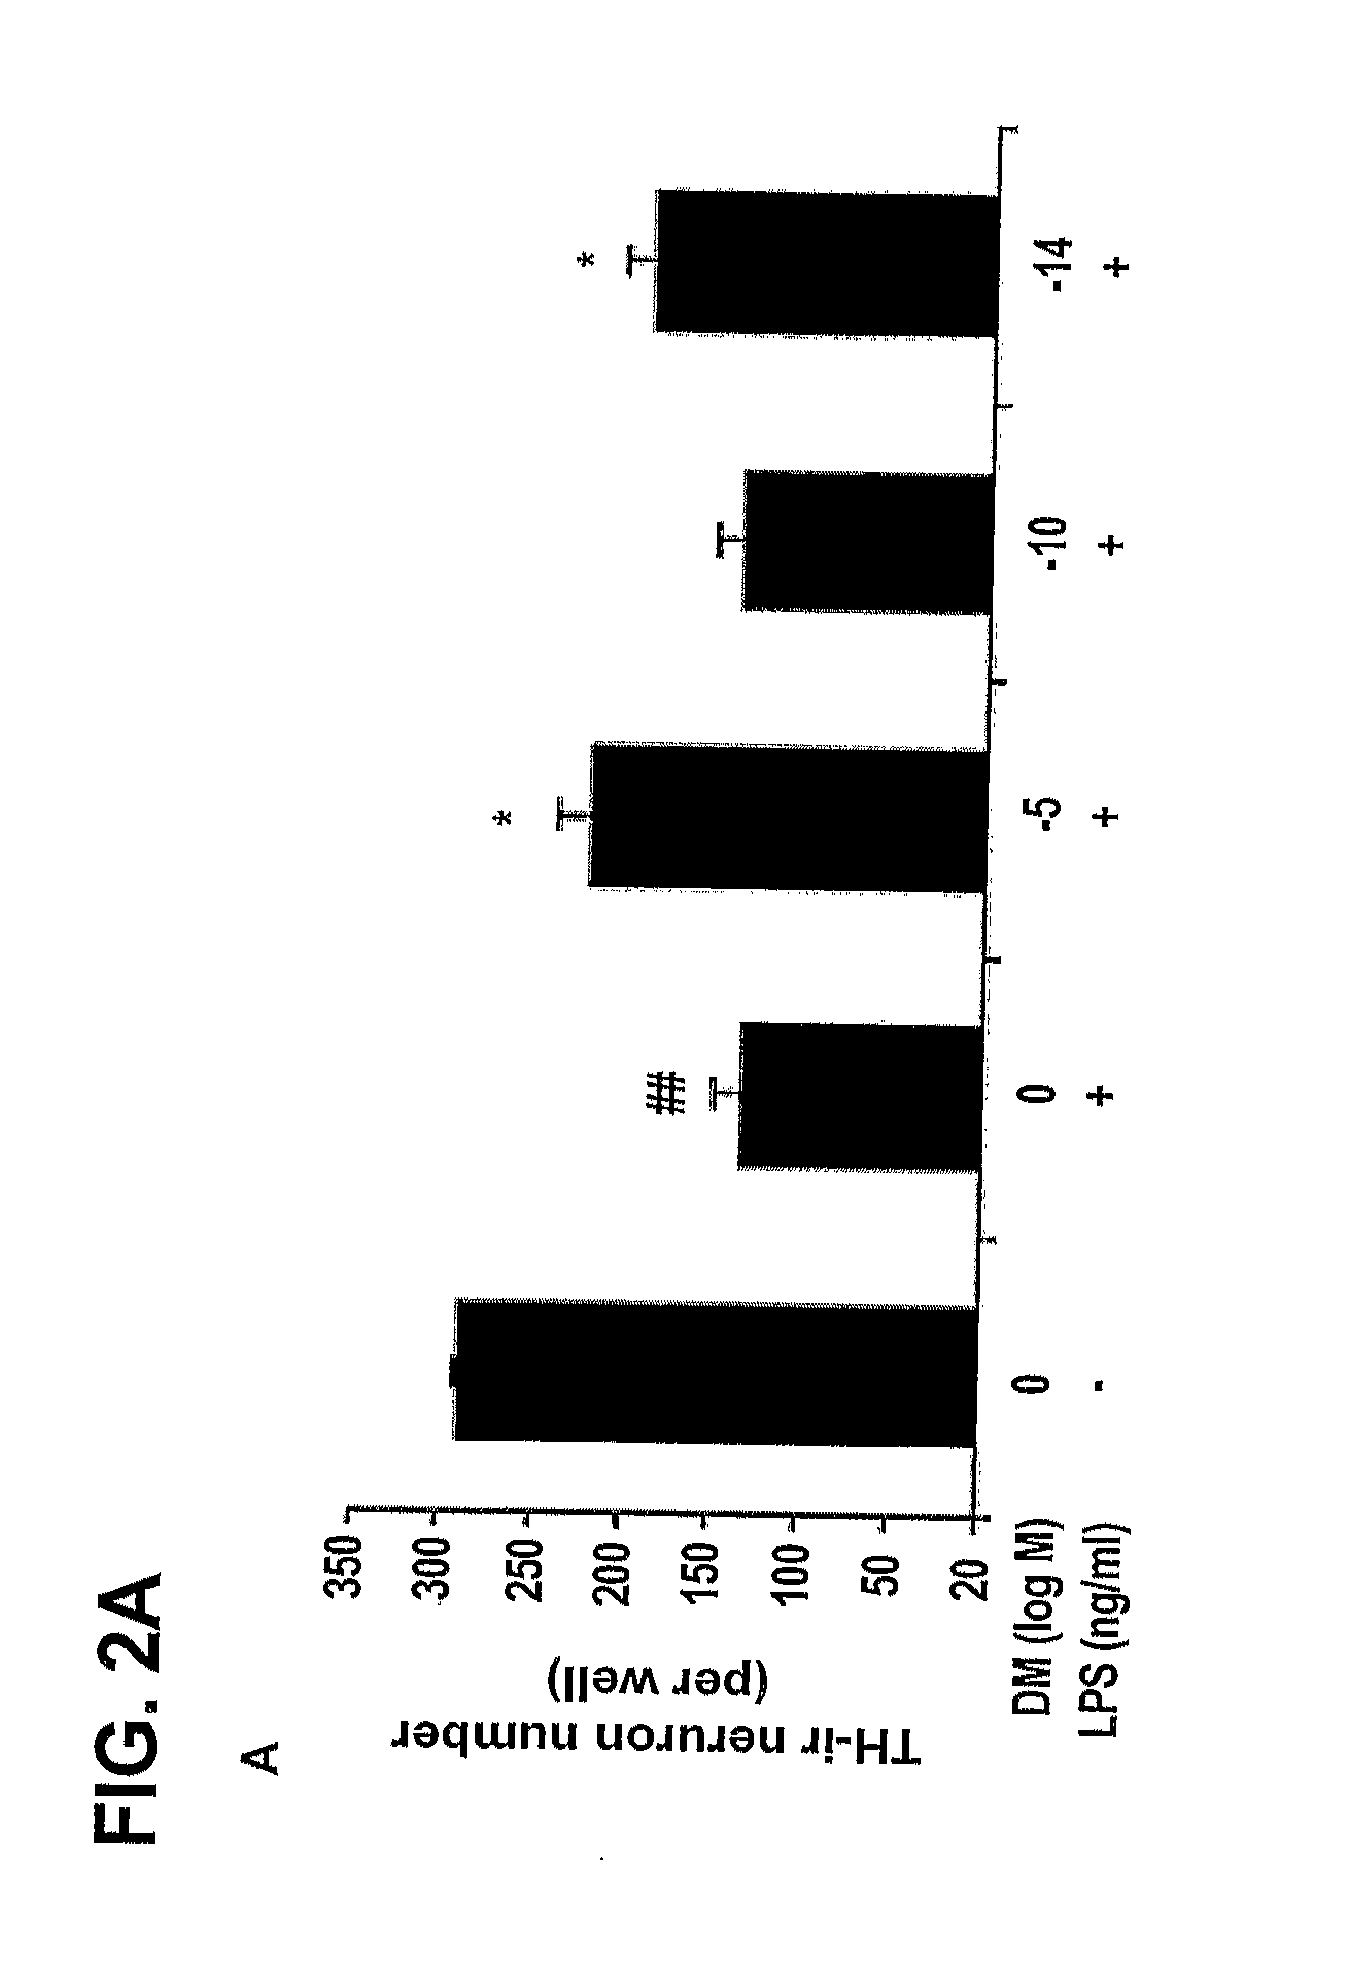 Methods related to the treatment of neurodegenerative and inflammatory conditions